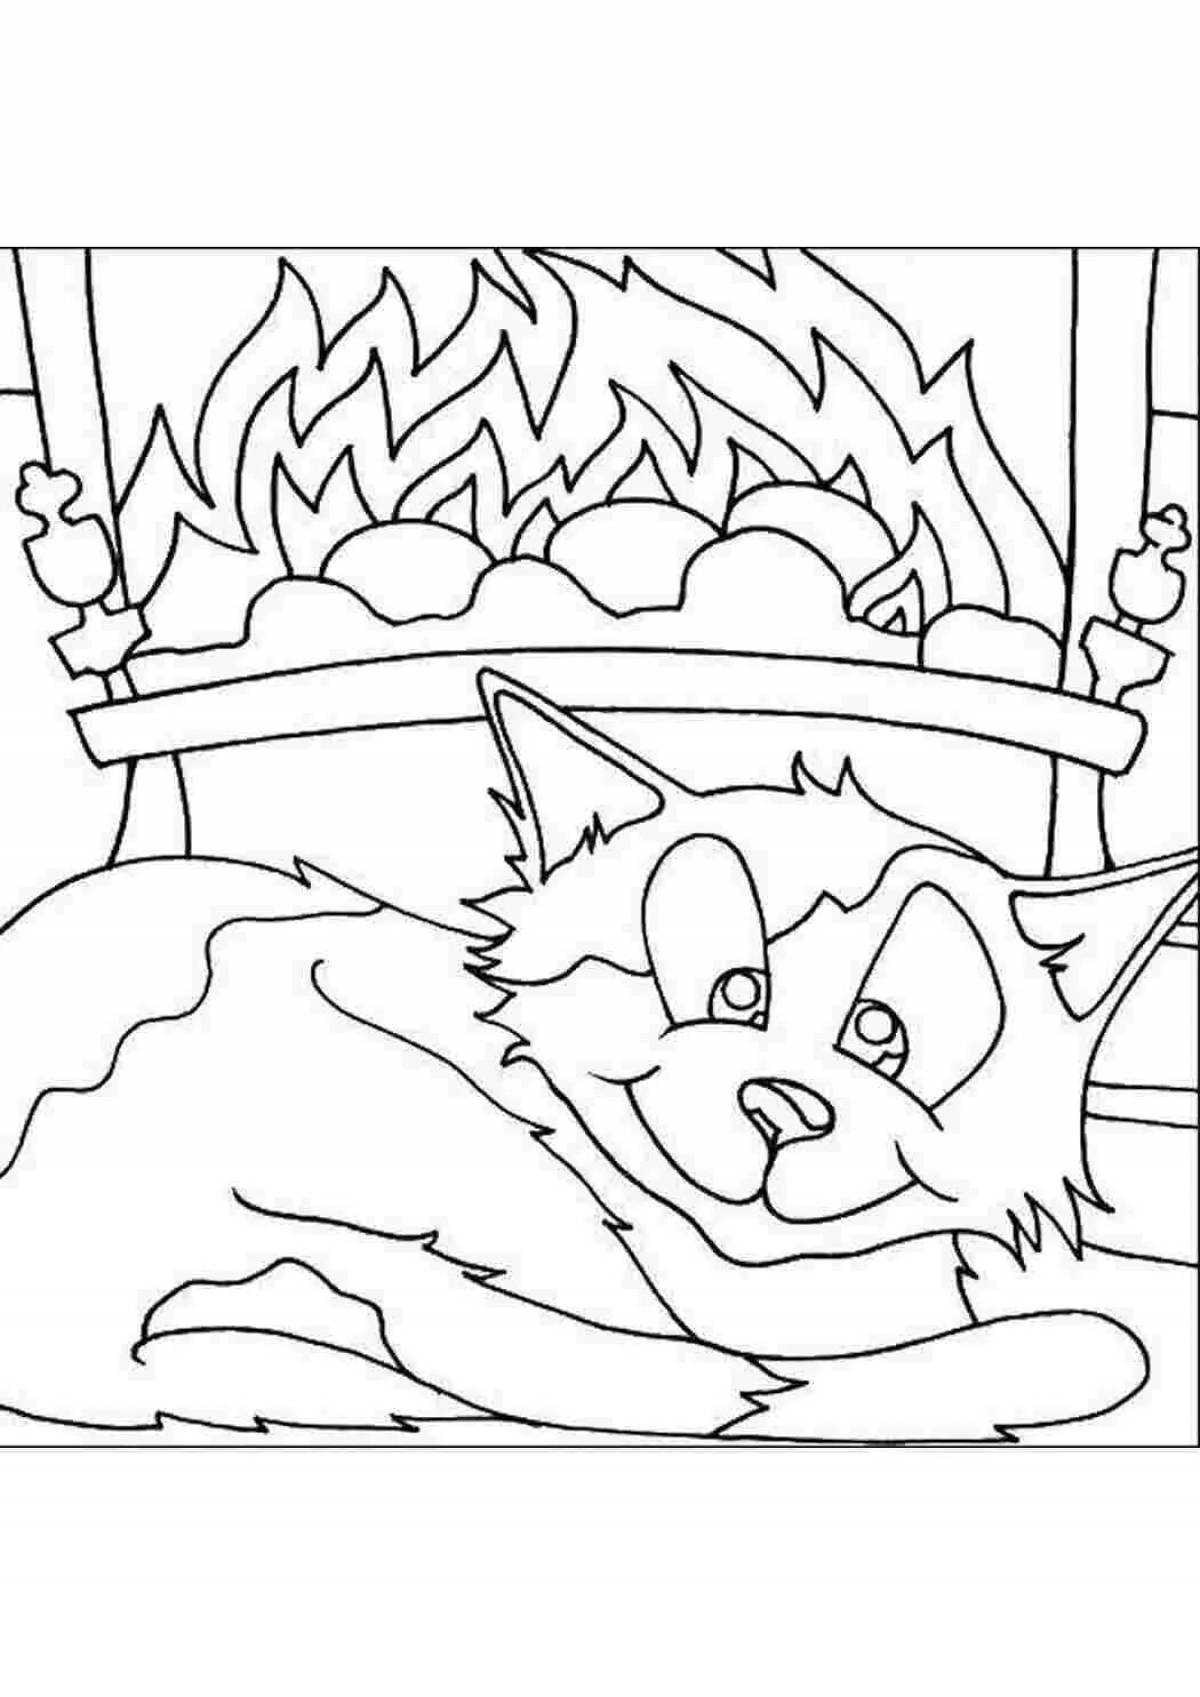 Incredible fire friend fire enemy coloring book for kids